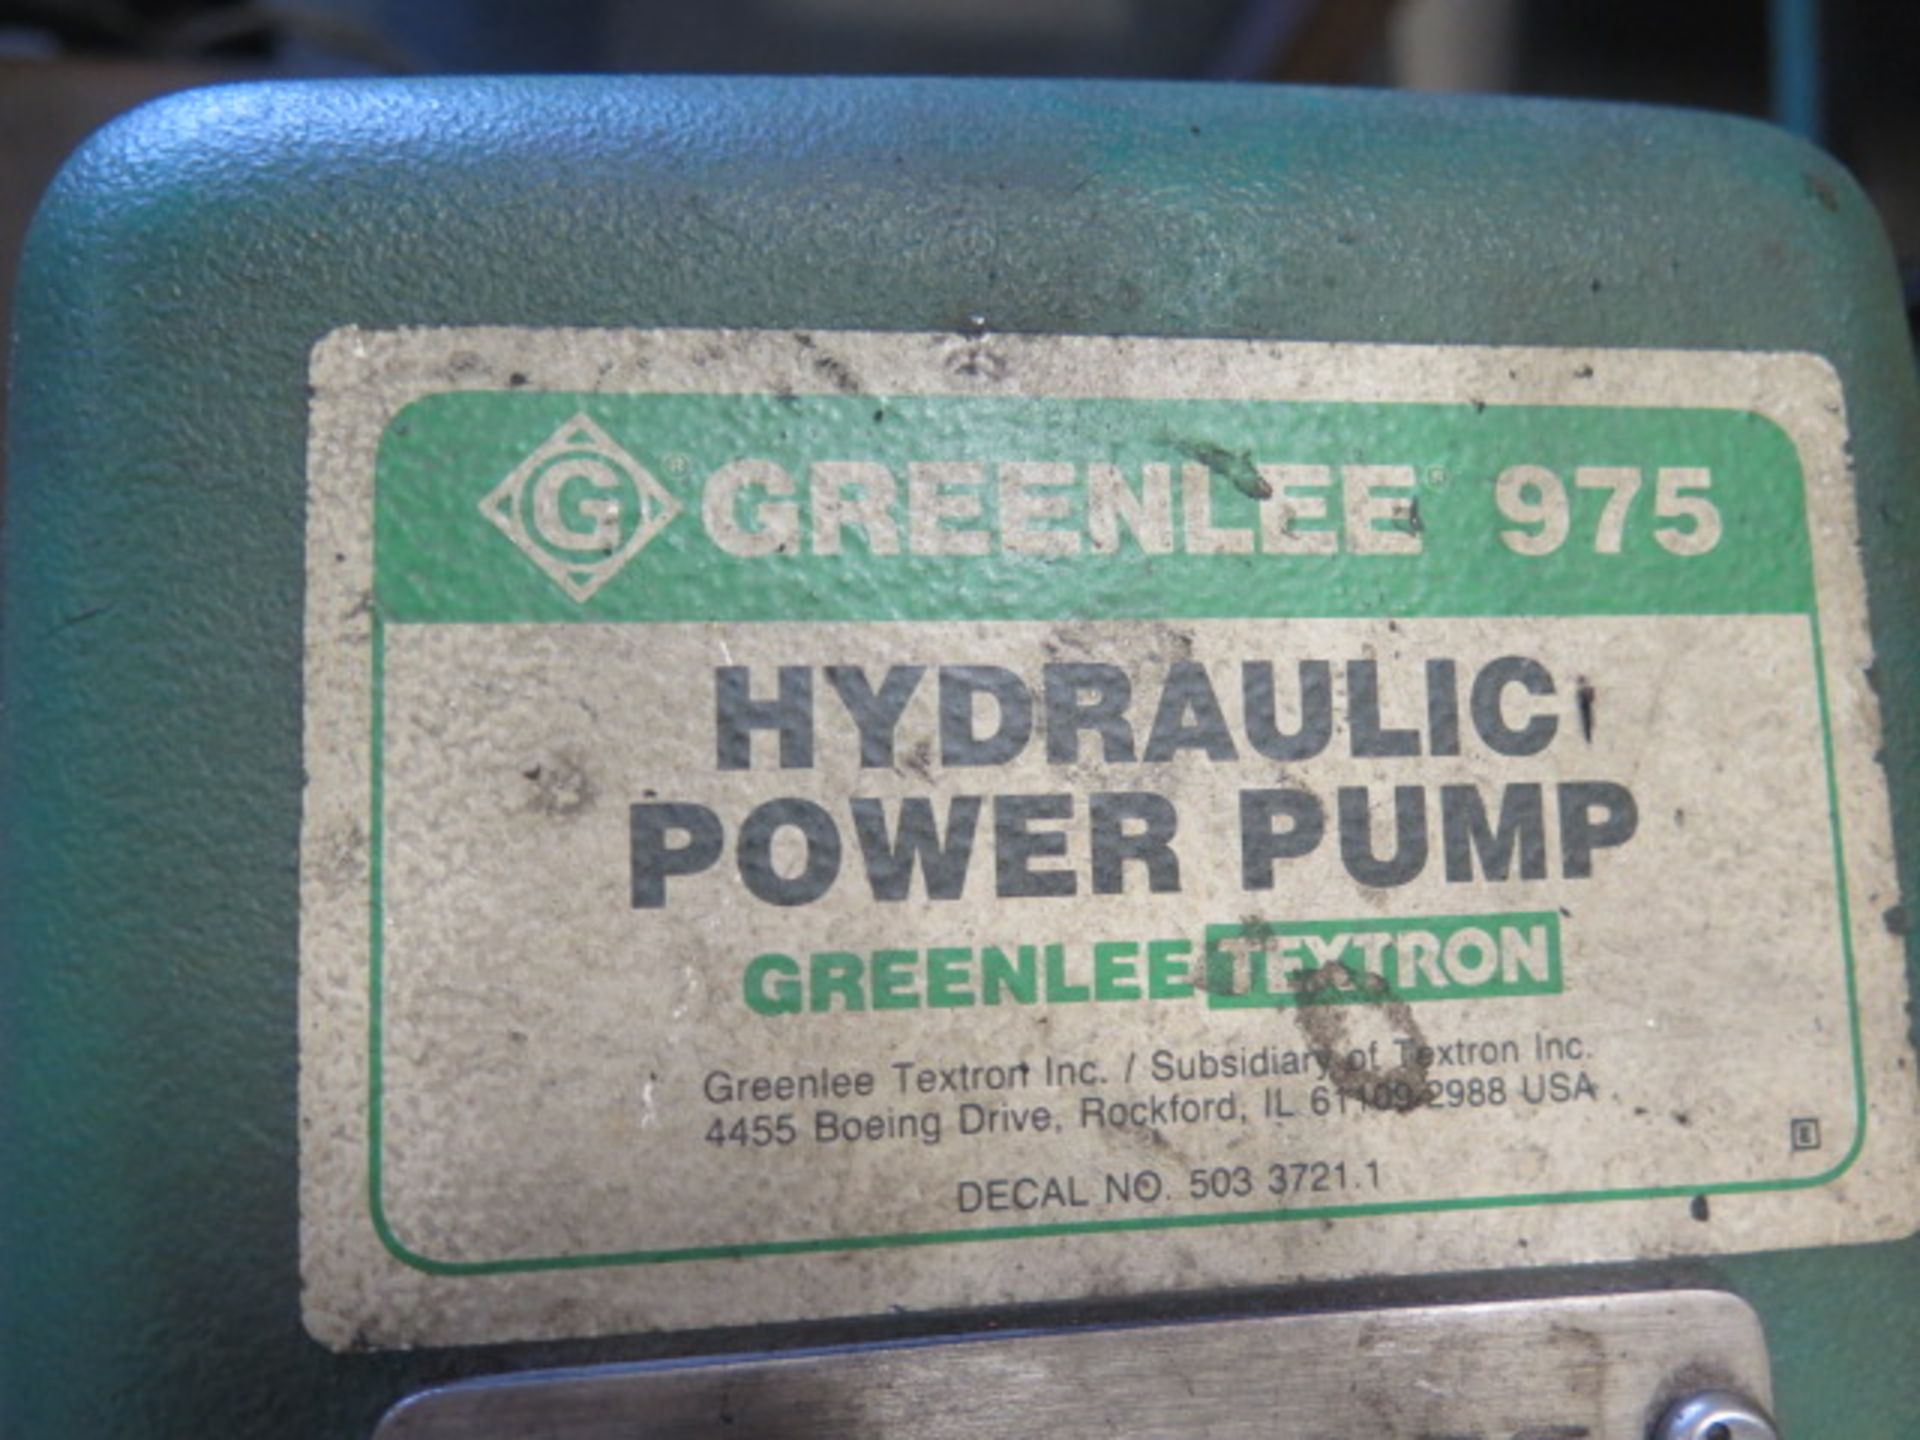 Greenlee Hydraulic Pipe Bender Set w/ Electric Hyd Power Unit, Bending Dies and Table SOLD AS IS - Image 11 of 11